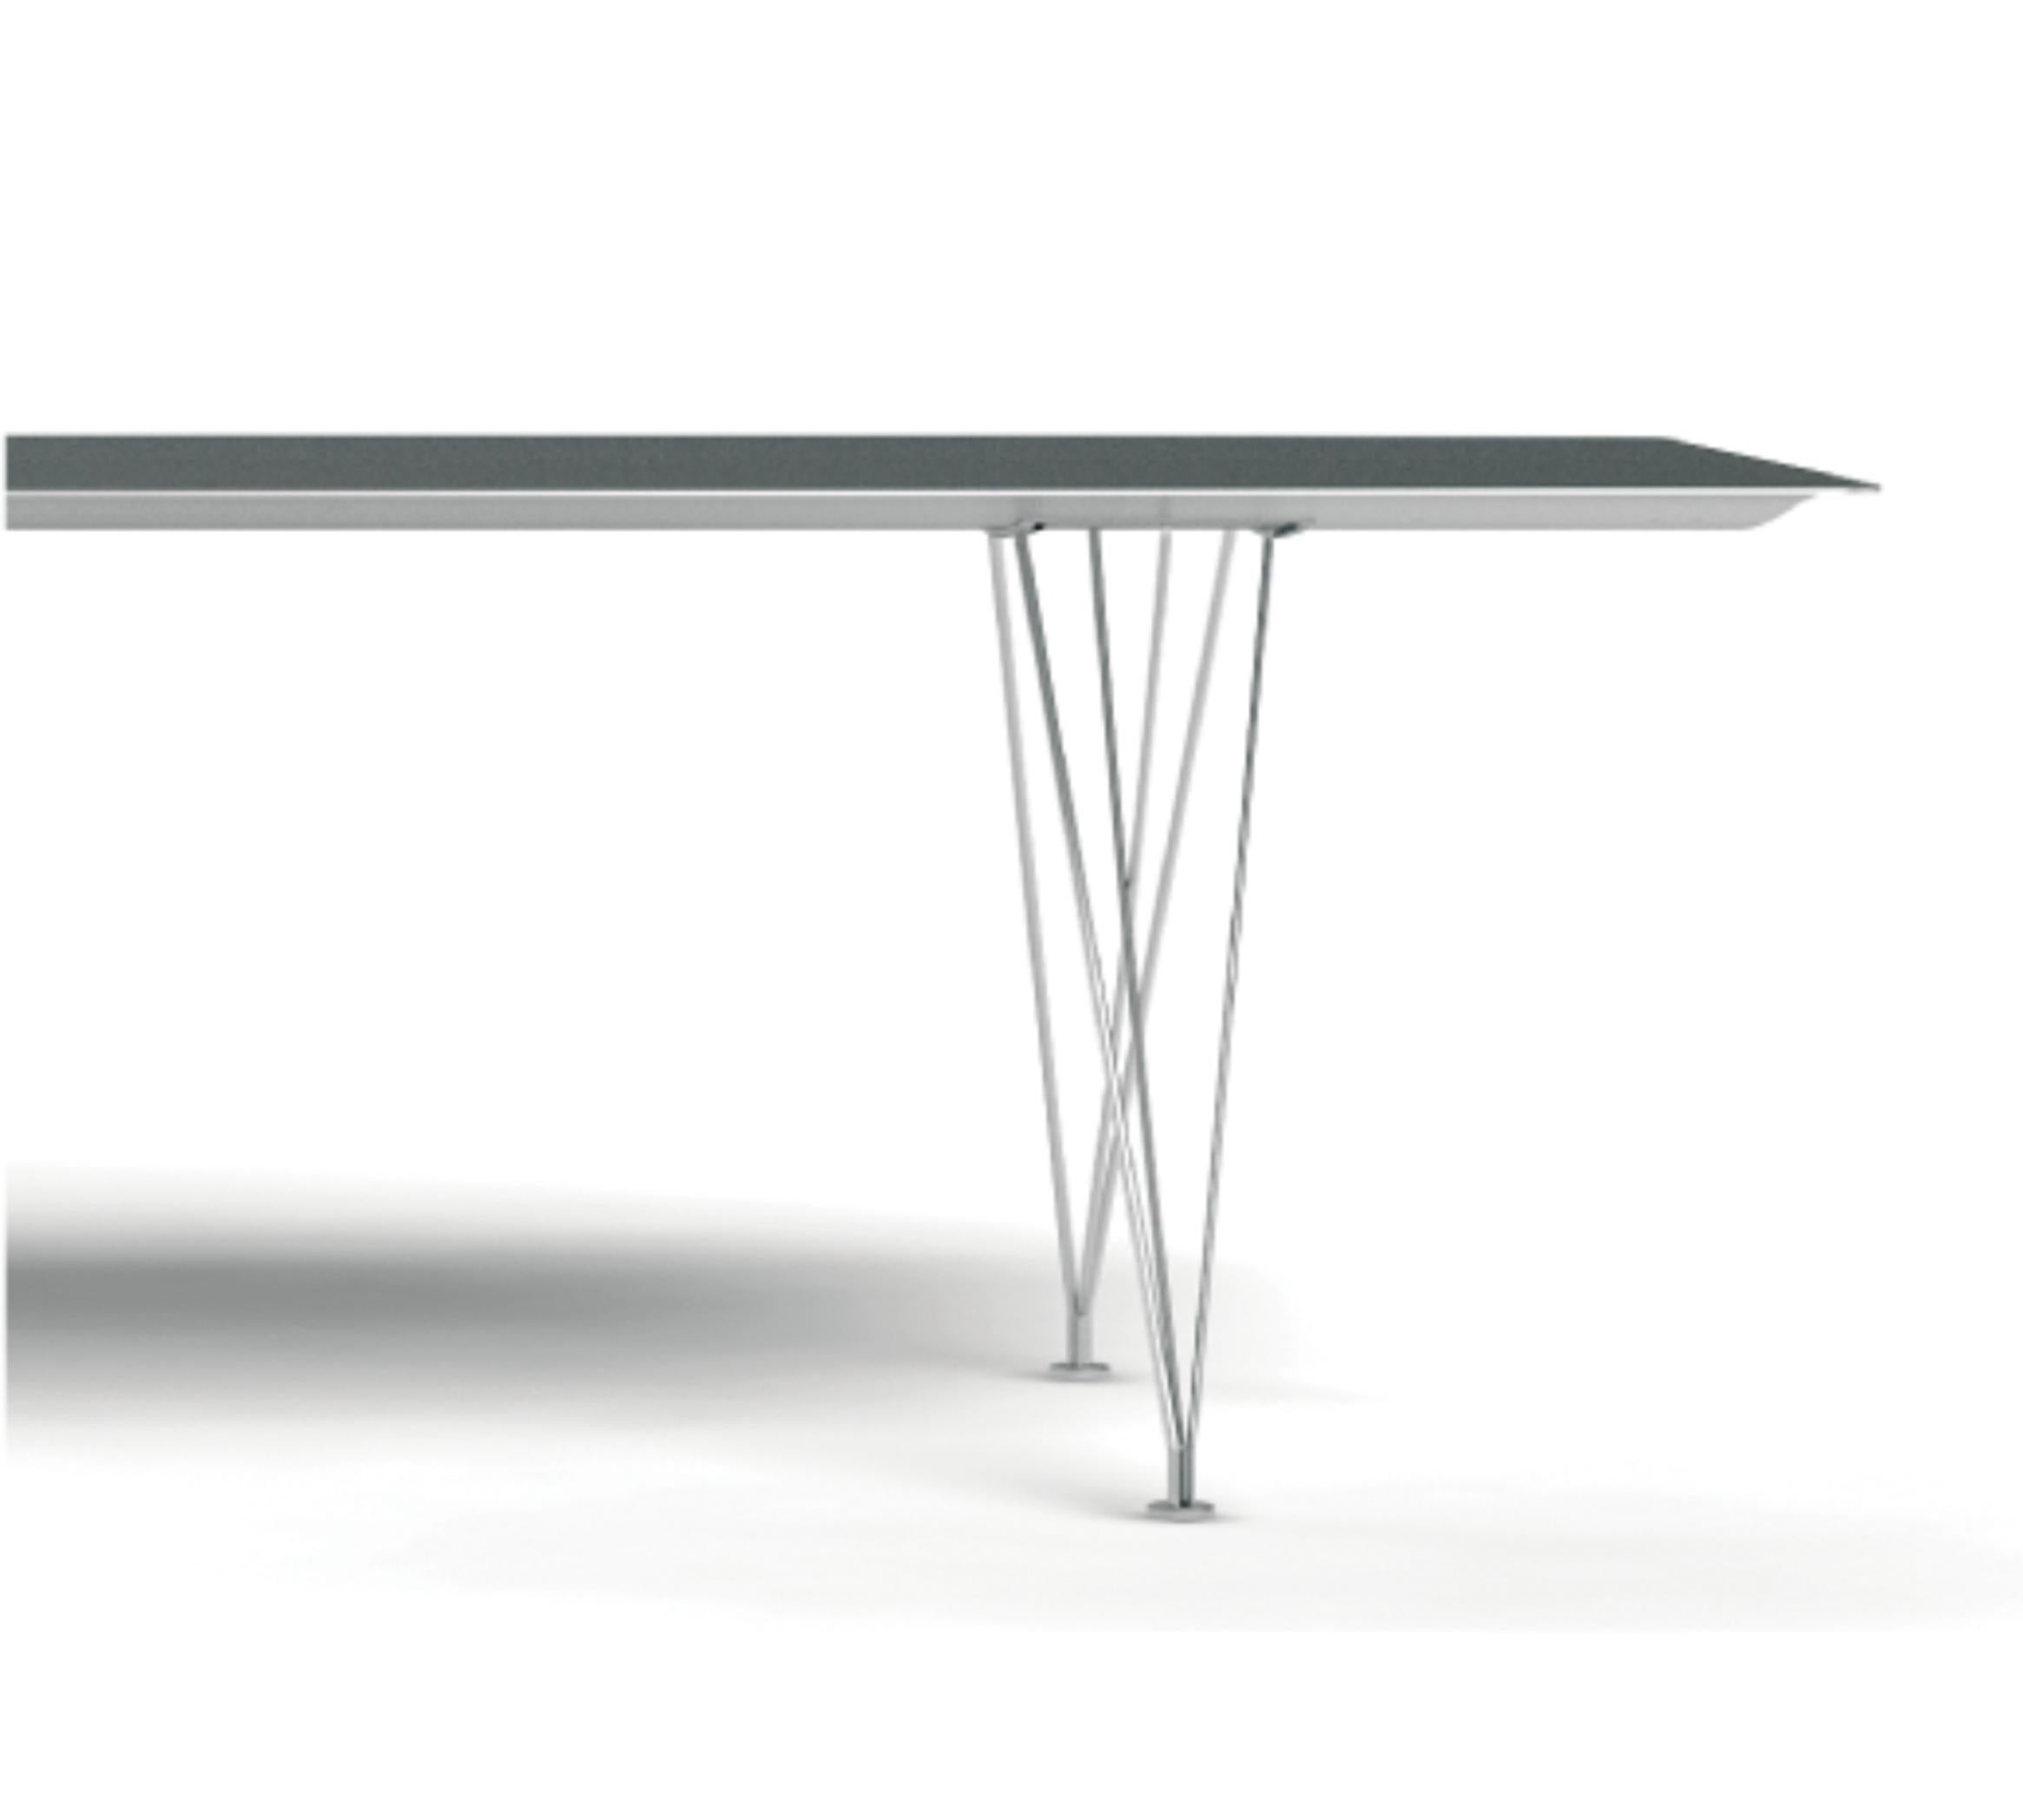 Konstantin Grcic Contemporary B-150 Aluminum Table by BD Barcelona For Sale 2